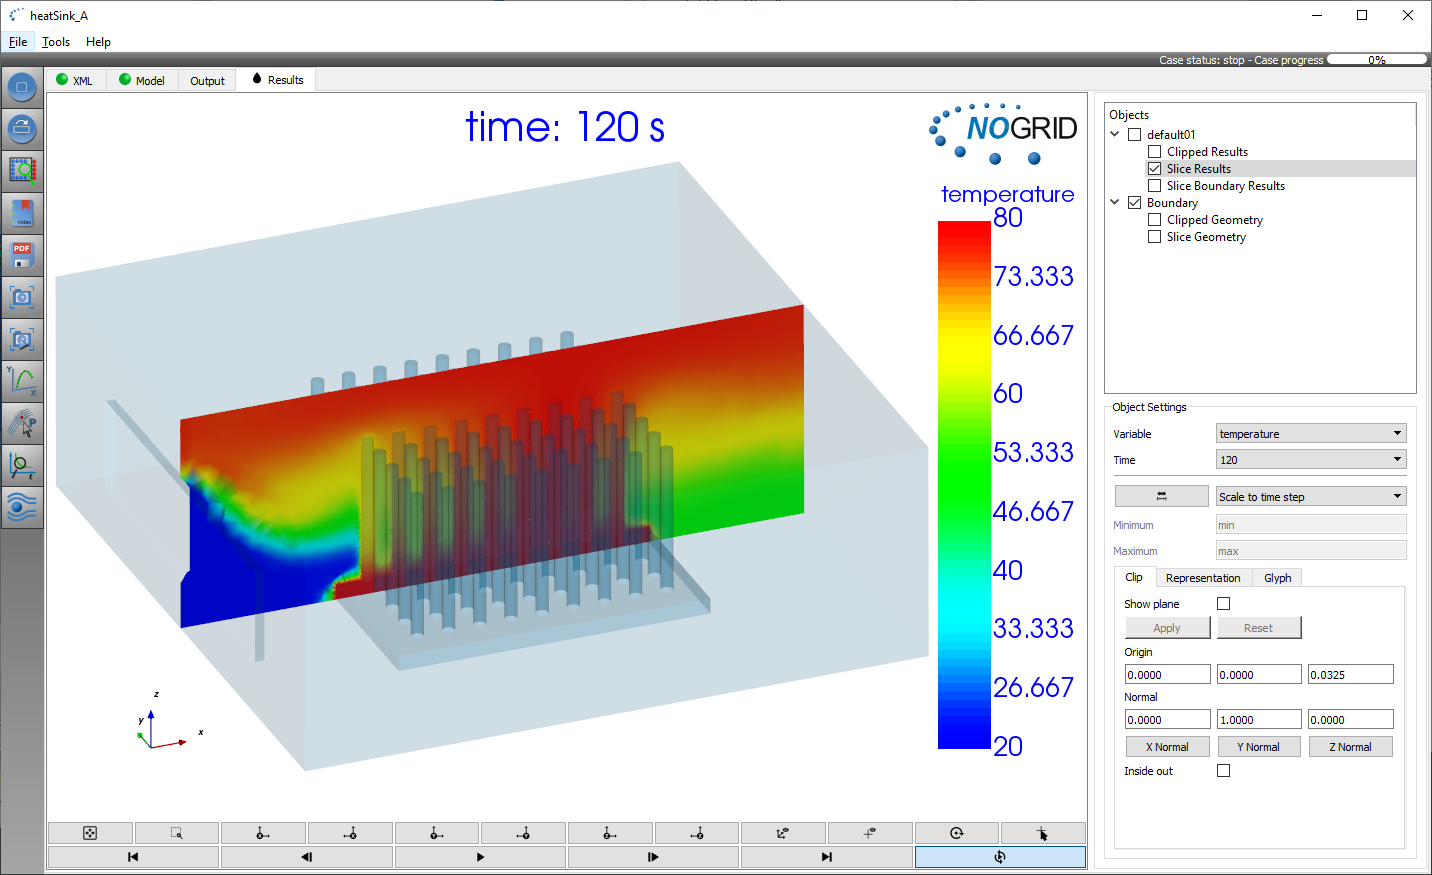 Temperature in air and heat sink shown in NOGRID points' GUI